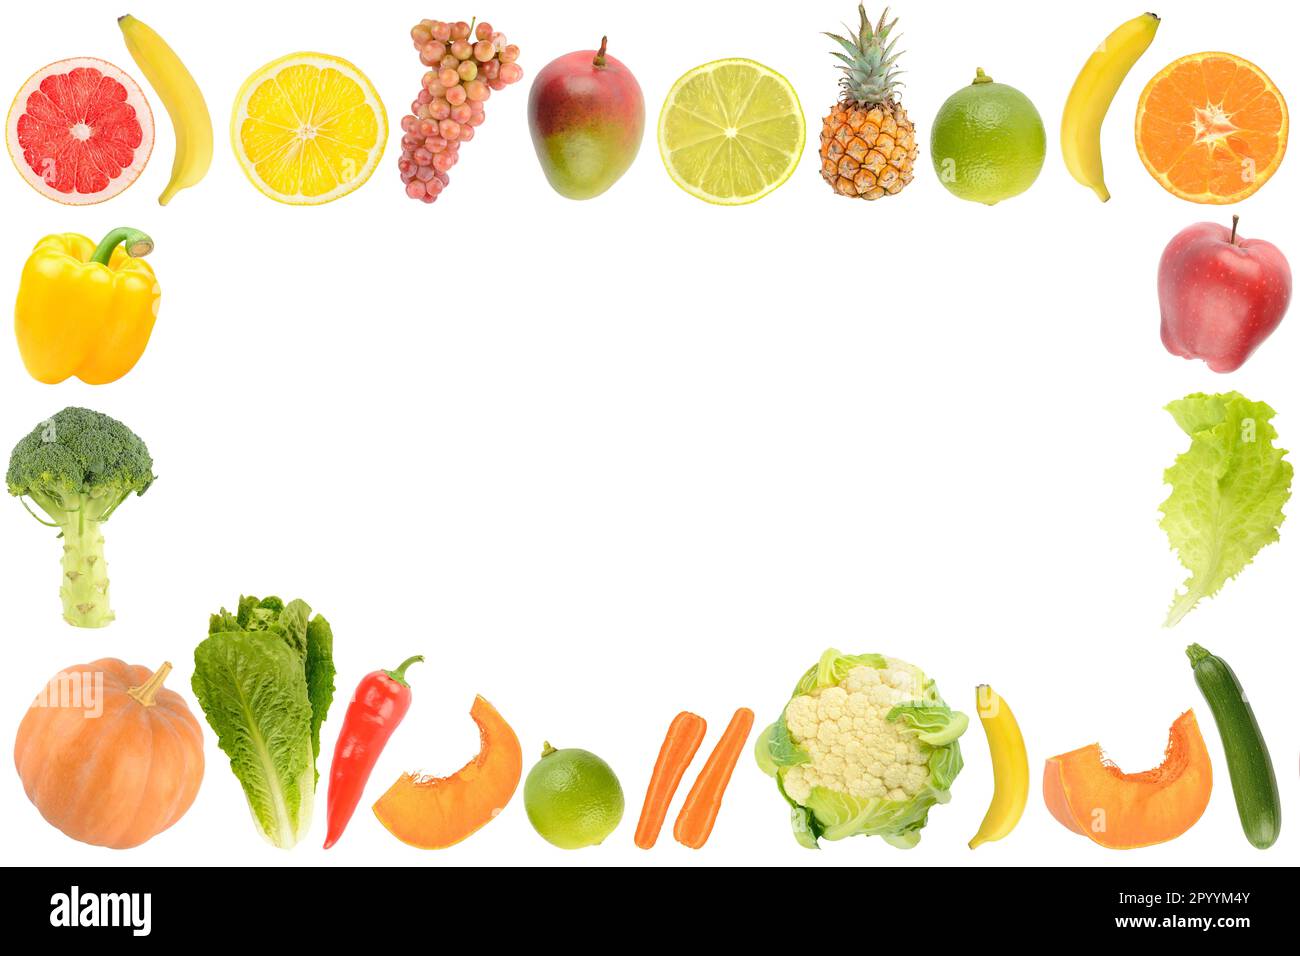 Frame of fresh and healthy vegetables and cut fruits isolated on white background. Stock Photo